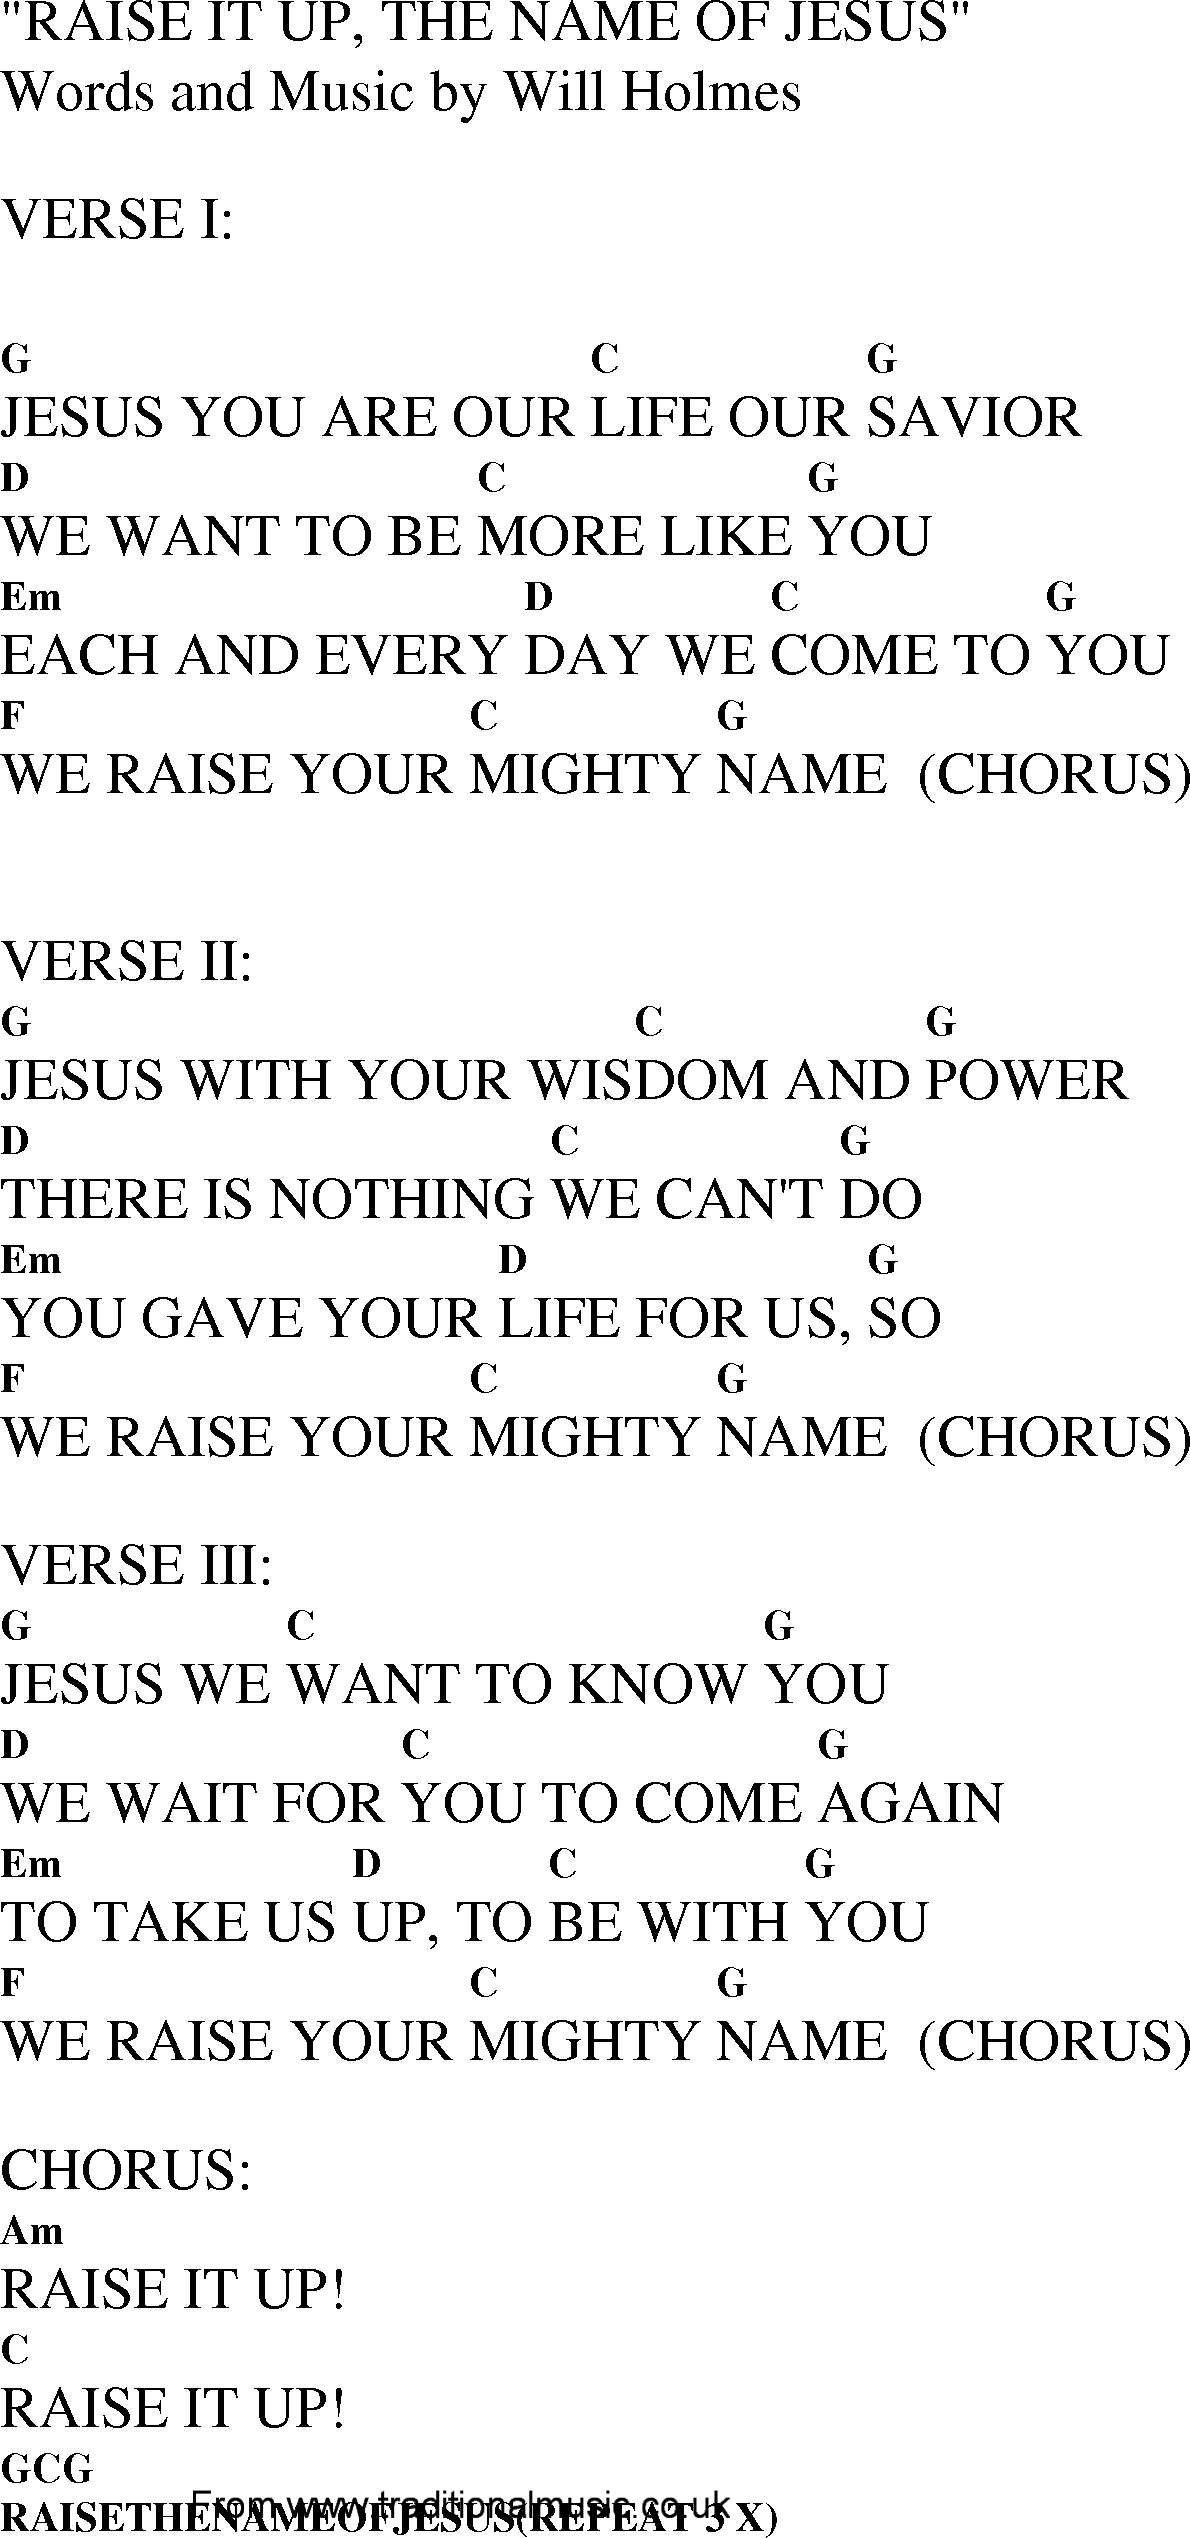 Gospel Song: raise_it_up_the_name_of_jesus, lyrics and chords.